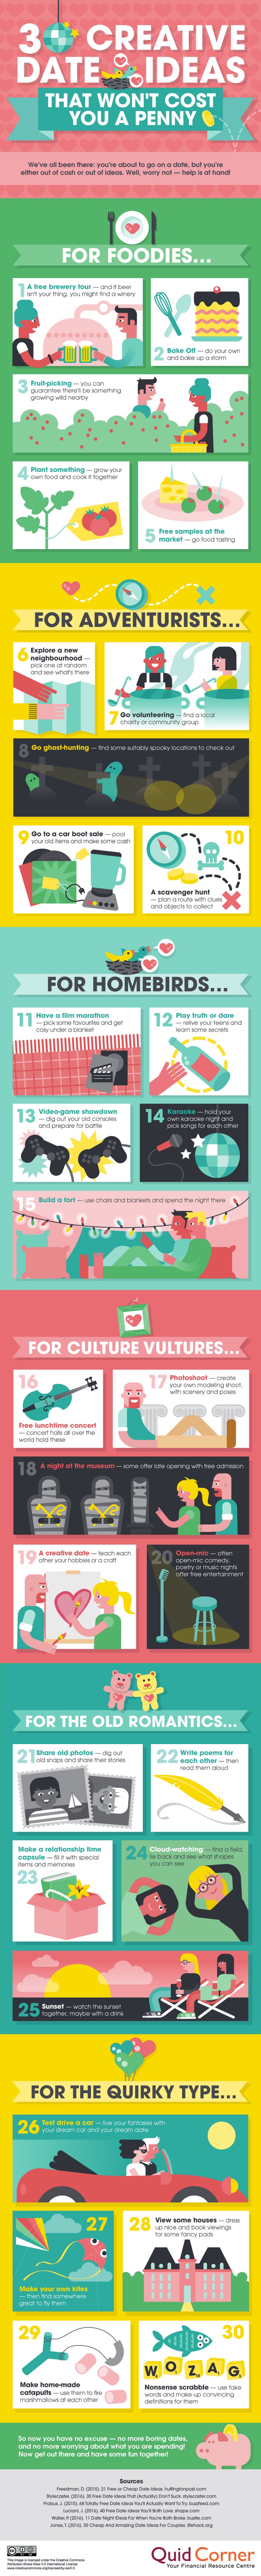 infographic, dating, fun, ideas, free